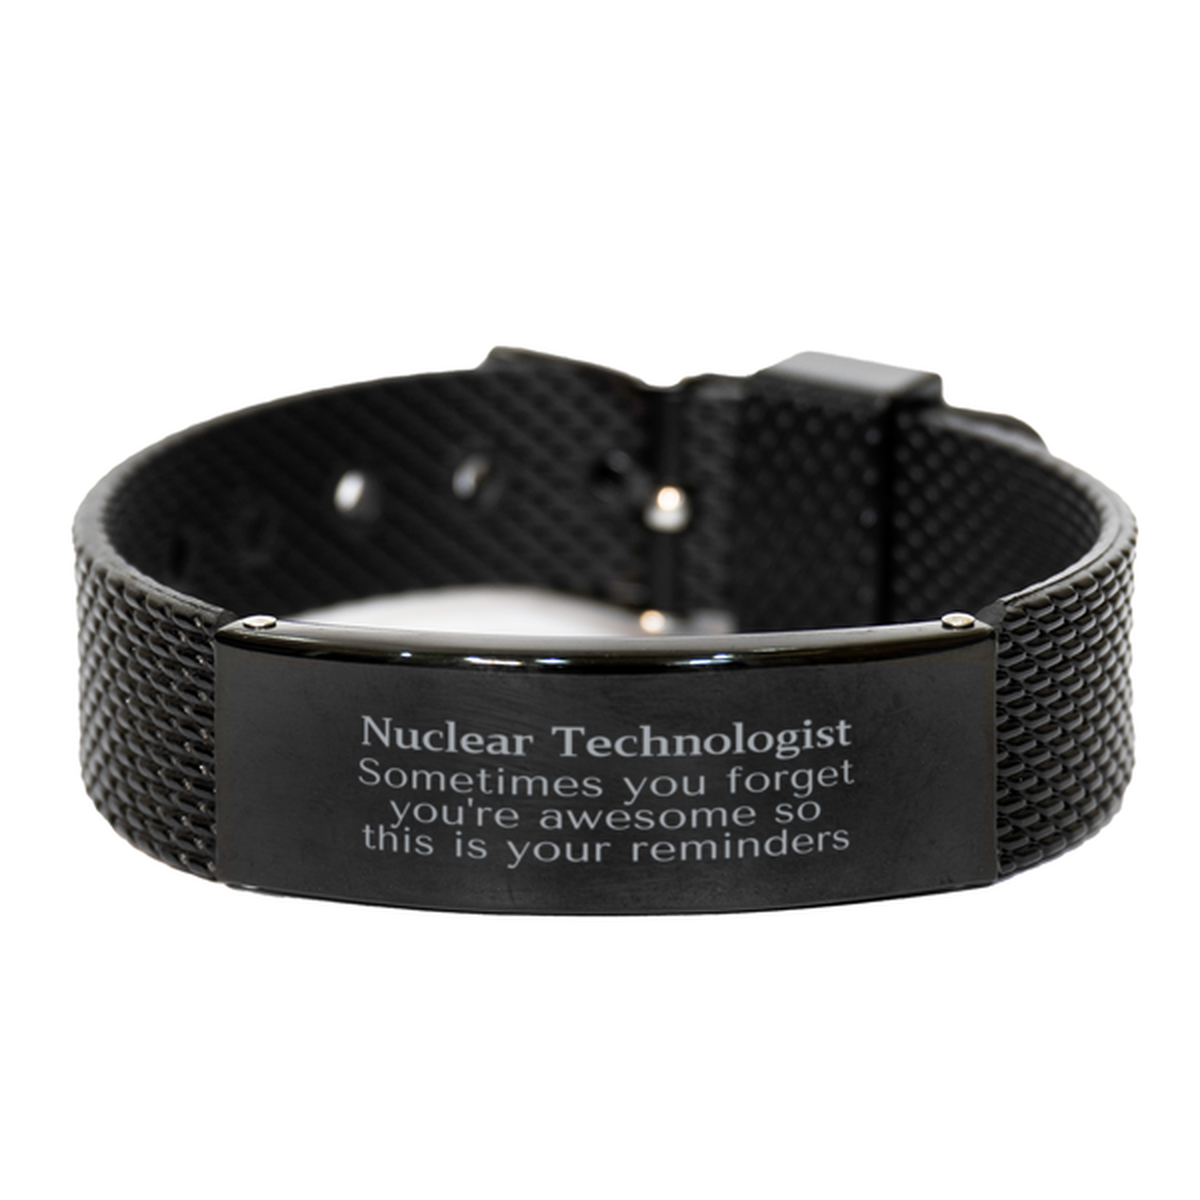 Sentimental Nuclear Technologist Black Shark Mesh Bracelet, Nuclear Technologist Sometimes you forget you're awesome so this is your reminders, Graduation Christmas Birthday Gifts for Nuclear Technologist, Men, Women, Coworkers